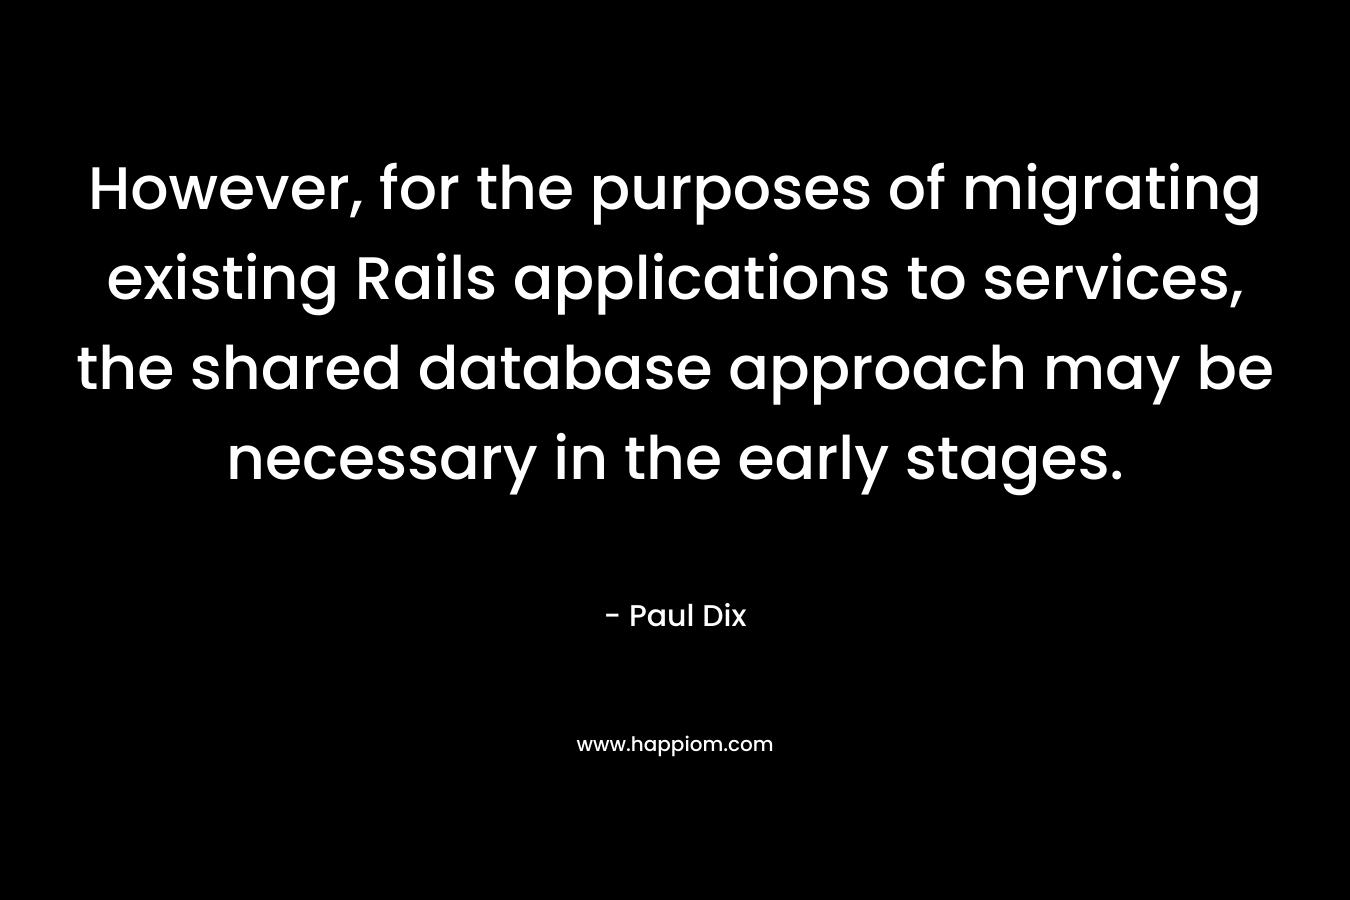 However, for the purposes of migrating existing Rails applications to services, the shared database approach may be necessary in the early stages.